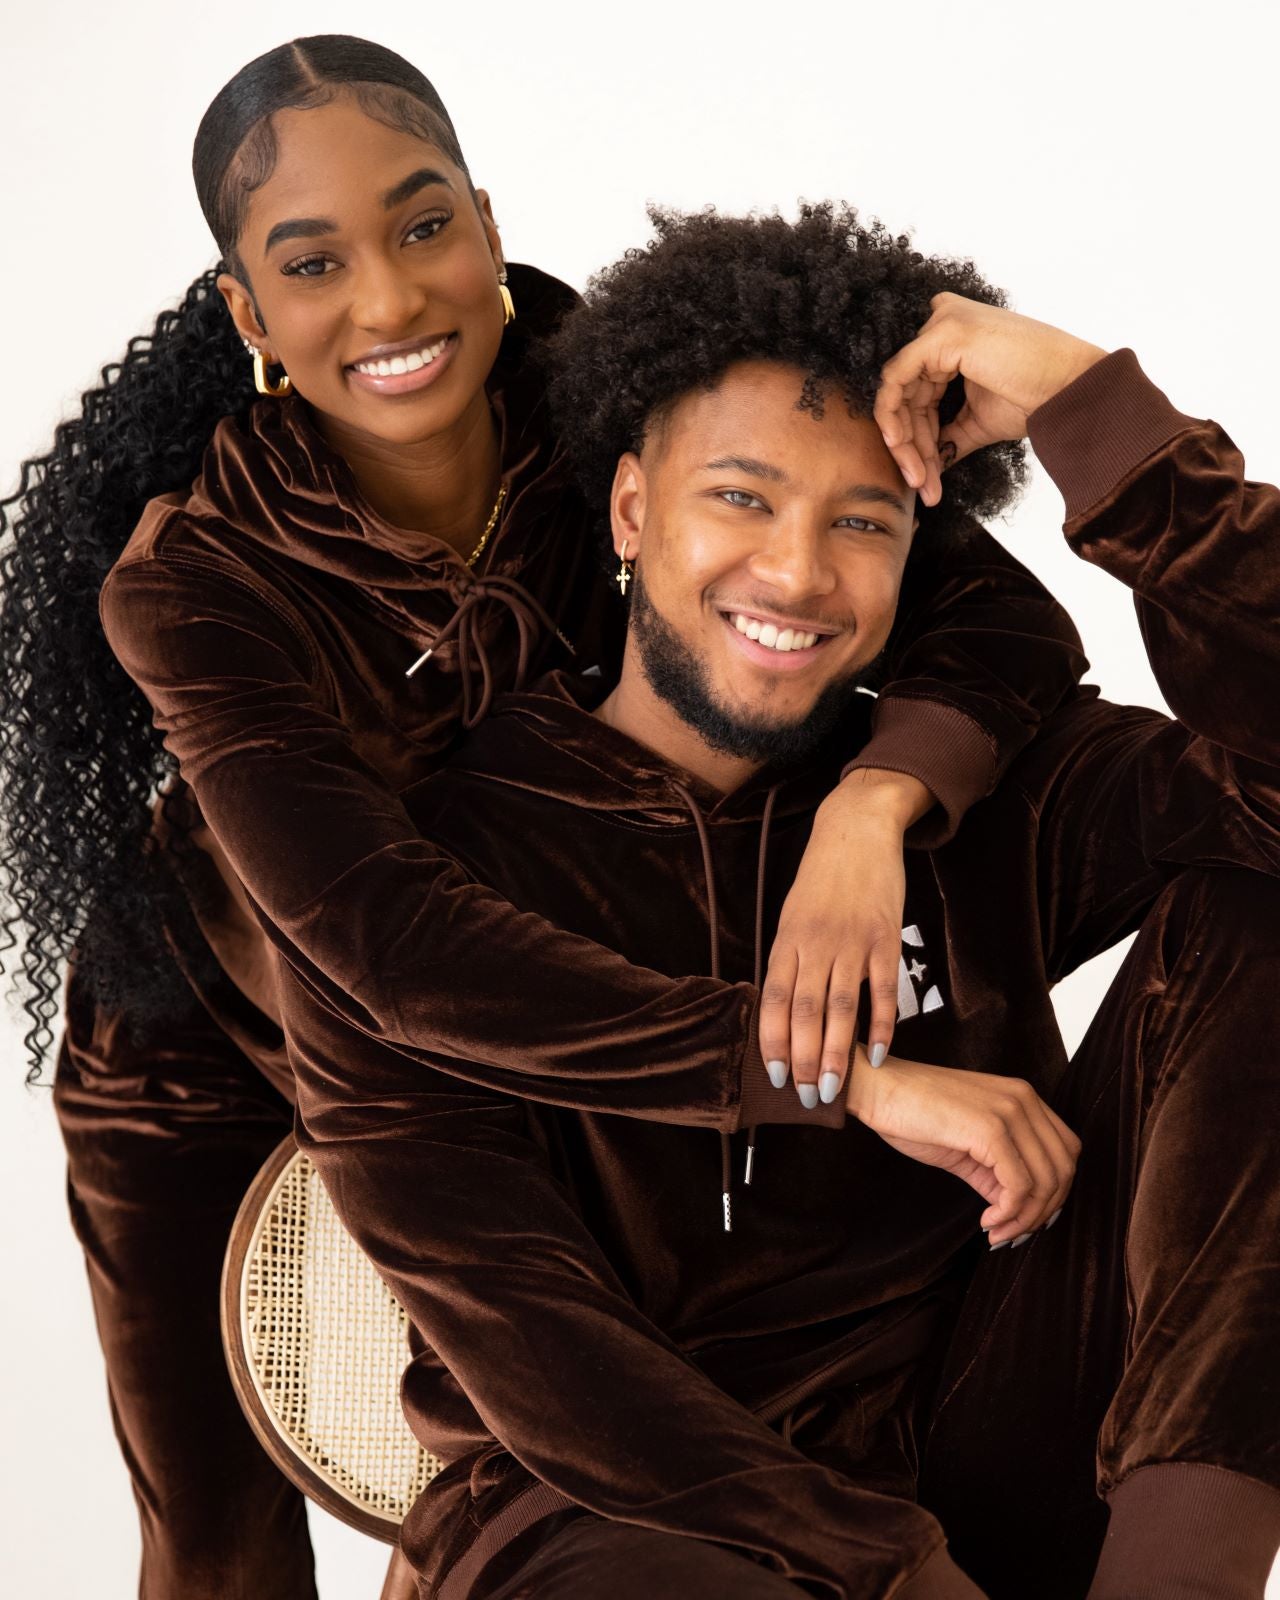 Up close photos of a female and male model wearing the e's element chocolate brown velvet jogger set. This picture shows the details on the hoodie such as the adjustable hood strings, wrist  and ankle details and the e's element logo places on the right hand side of the picture.